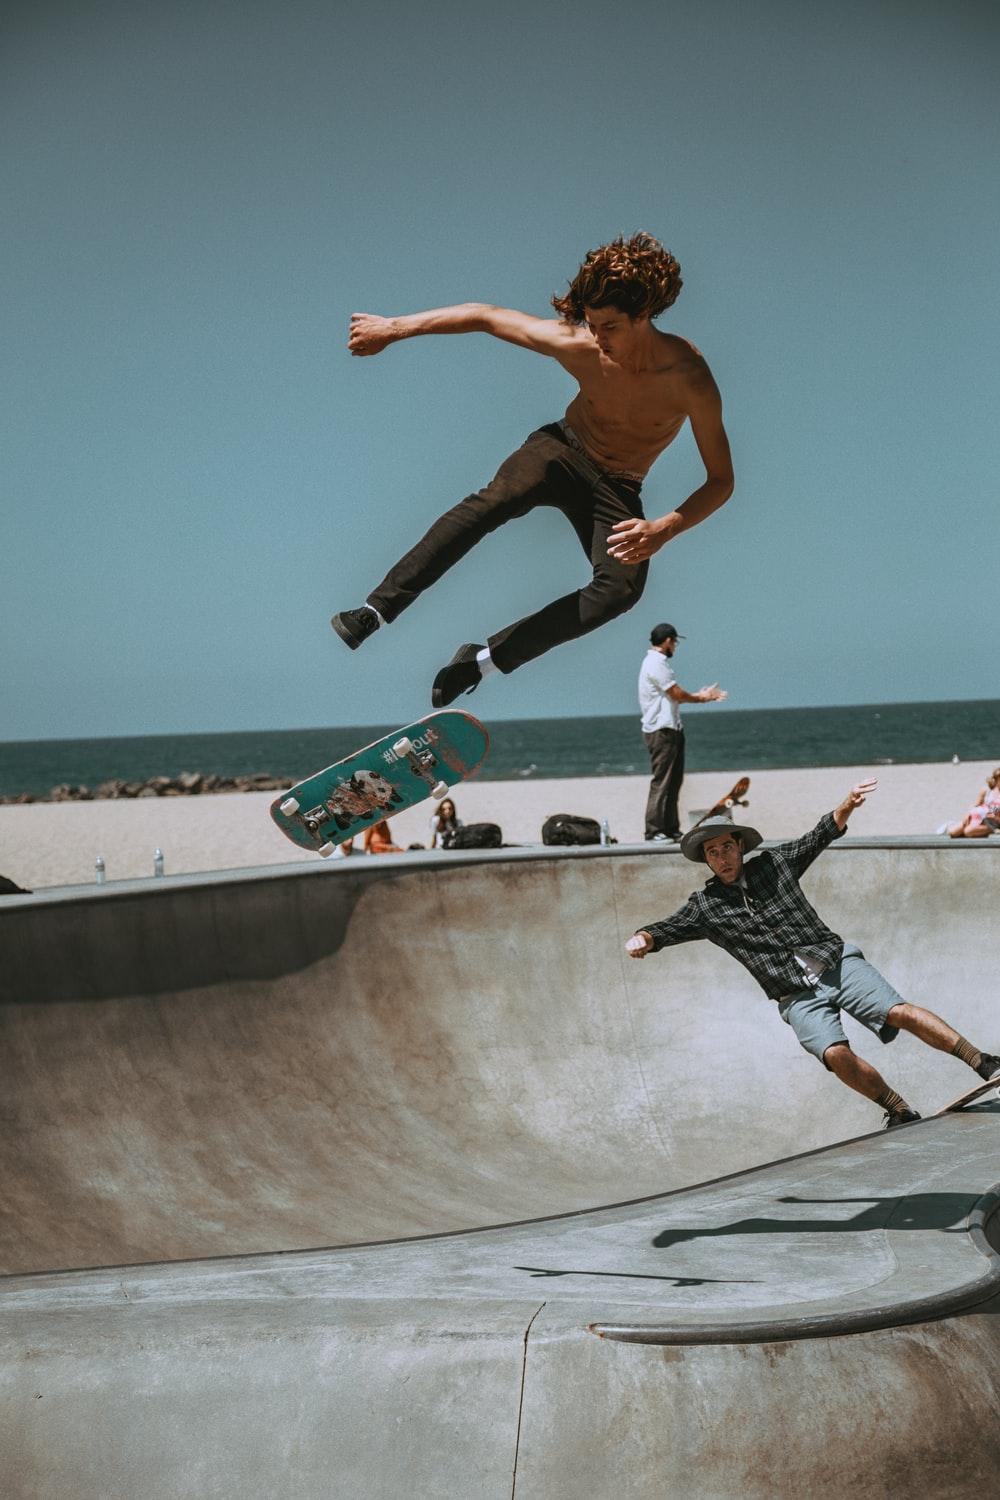 Skate Park Picture. Download Free Image